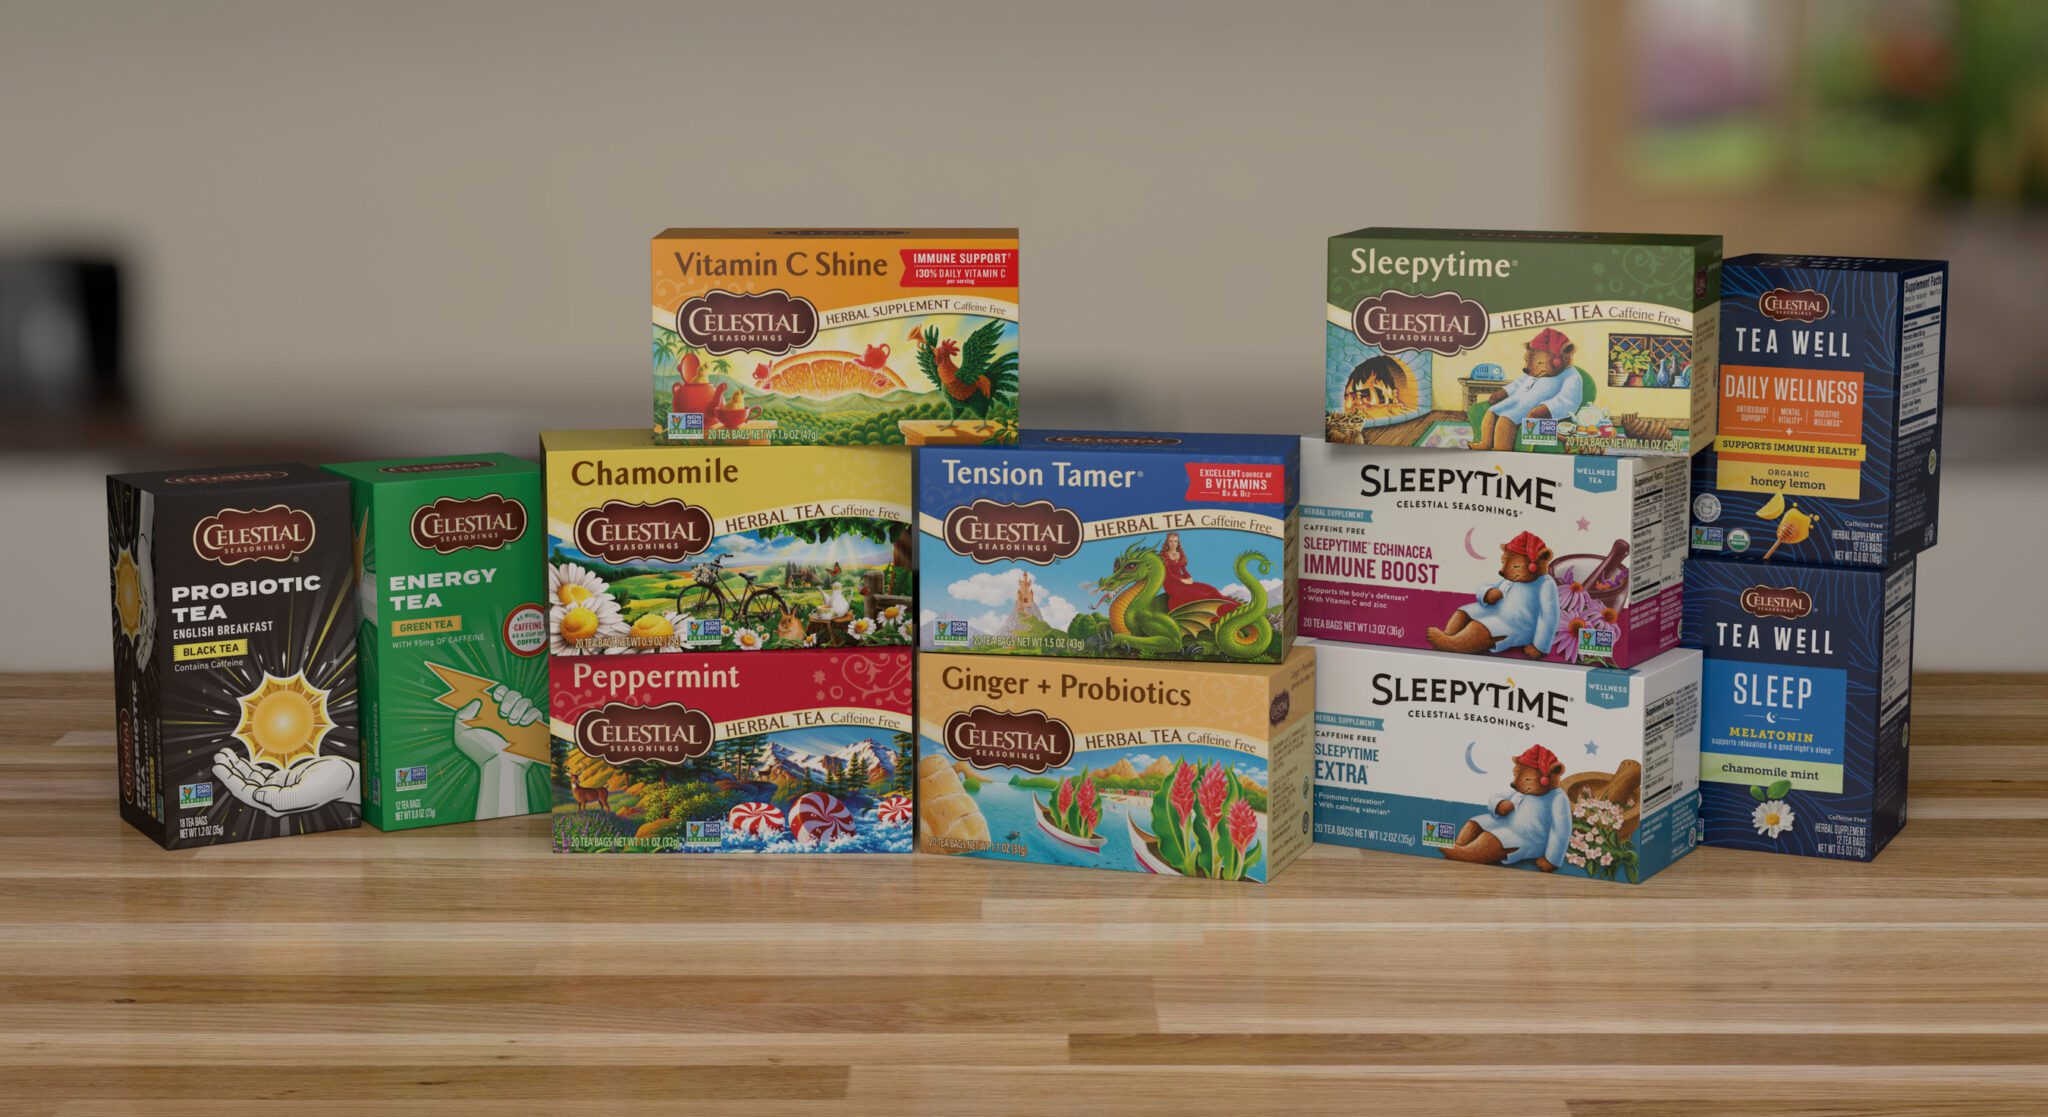 Celestial Seasonings Tea announces new products advertising campaign